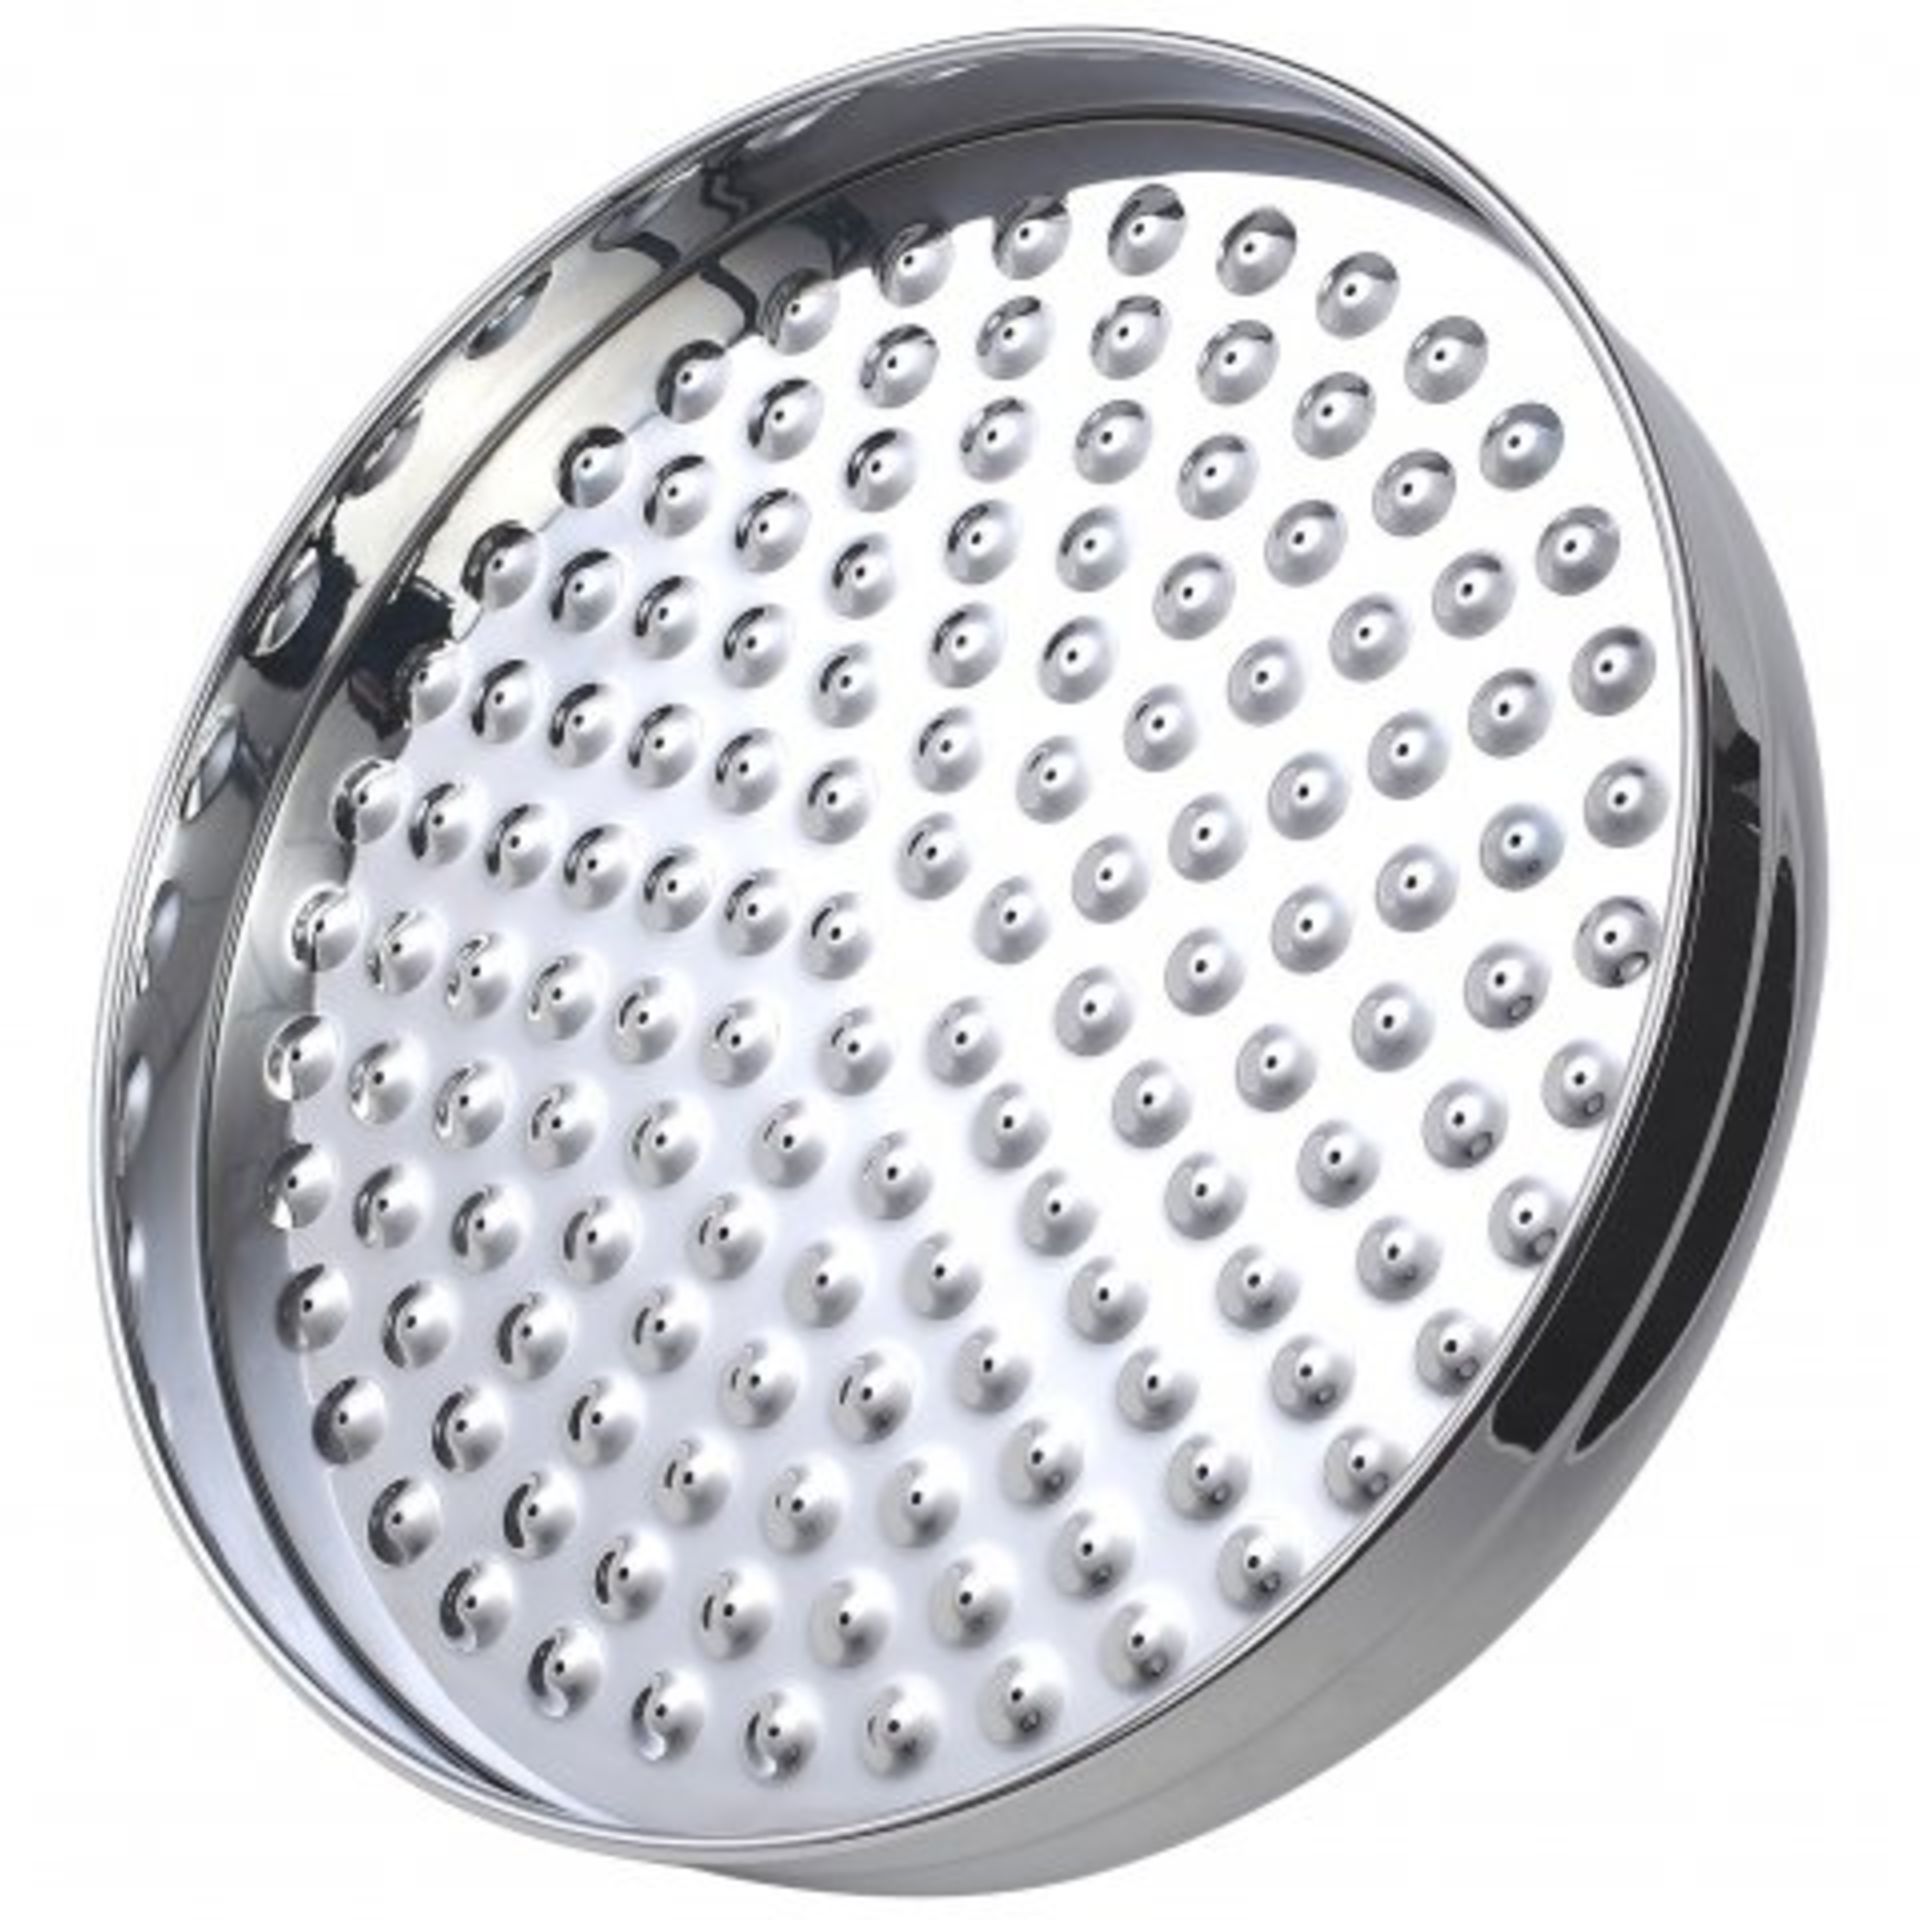 (REF146) 205mm Traditional Rain Chrome Plated Solid Brass Shower Head - Finest Range Our stunning - Image 2 of 3